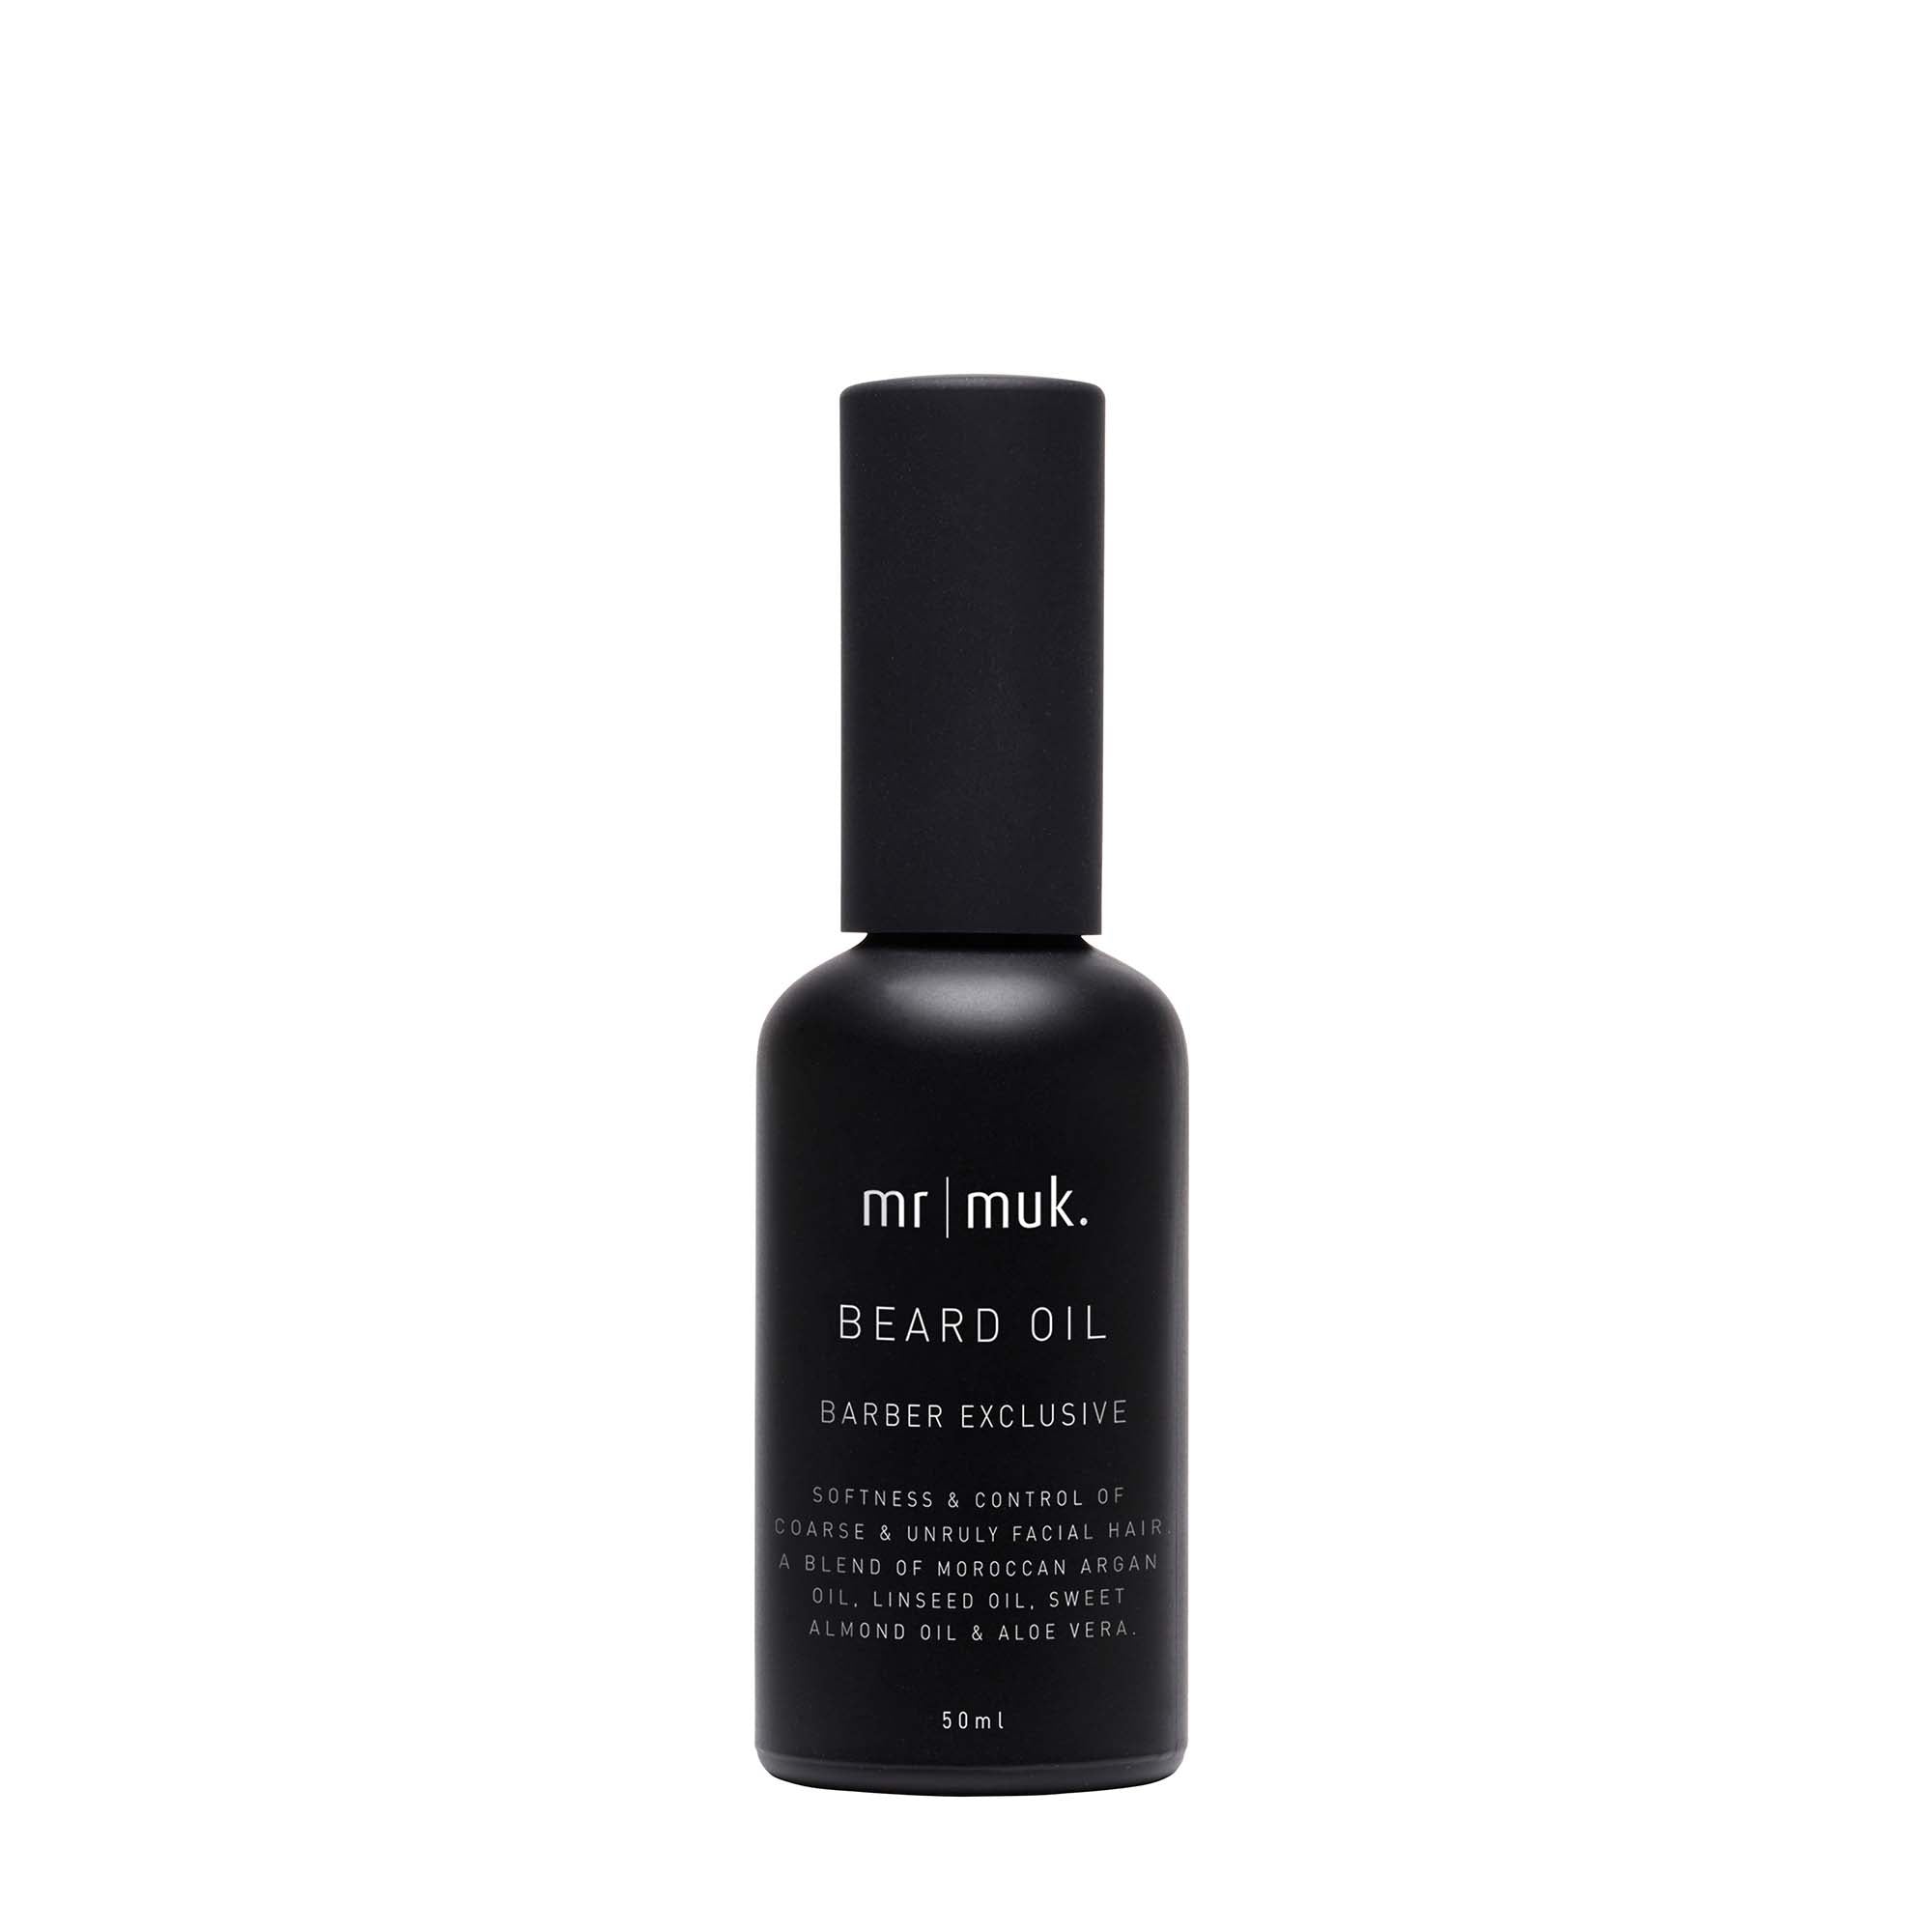 Mr Muk non-greasy beard oil formula makes even the worst beard soft and touchable.